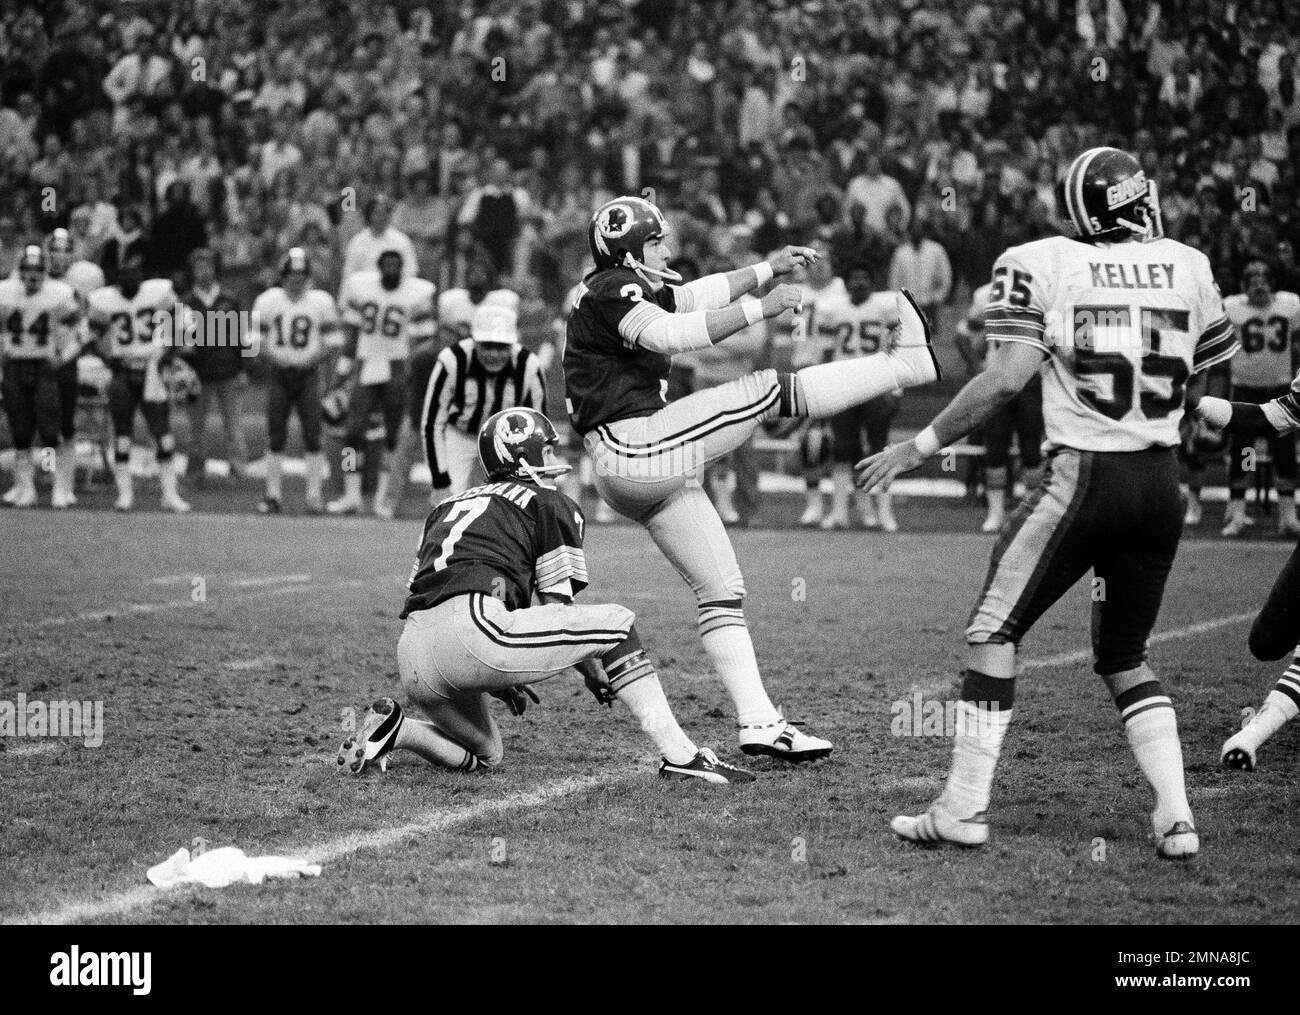 https://c8.alamy.com/comp/2MNA8JC/washington-redskins-kicker-mark-moseley-3-watches-his-field-goal-kick-go-through-the-uprights-to-beat-the-new-york-giants-in-overtime-action-in-washington-nov-12-1978-holding-for-moseley-is-quarterback-joe-theismann-and-turning-to-take-a-look-is-giants-brian-kelley-55-the-score-ended-up-washington-16-giants-13-ap-photoira-schwarz-2MNA8JC.jpg